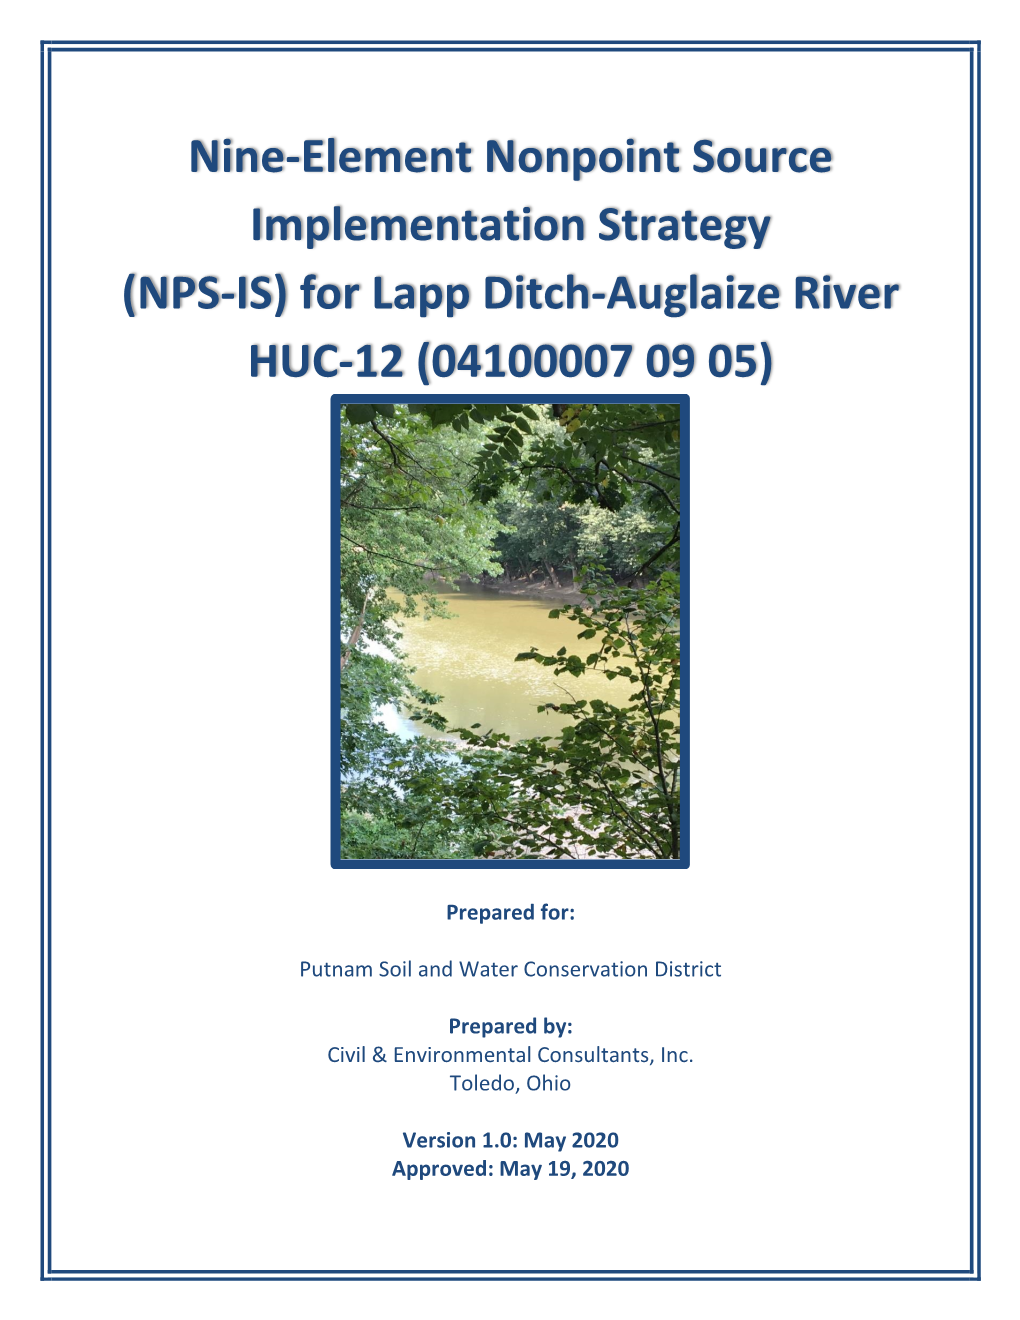 NPS-IS) for Lapp Ditch-Auglaize River HUC-12 (04100007 09 05